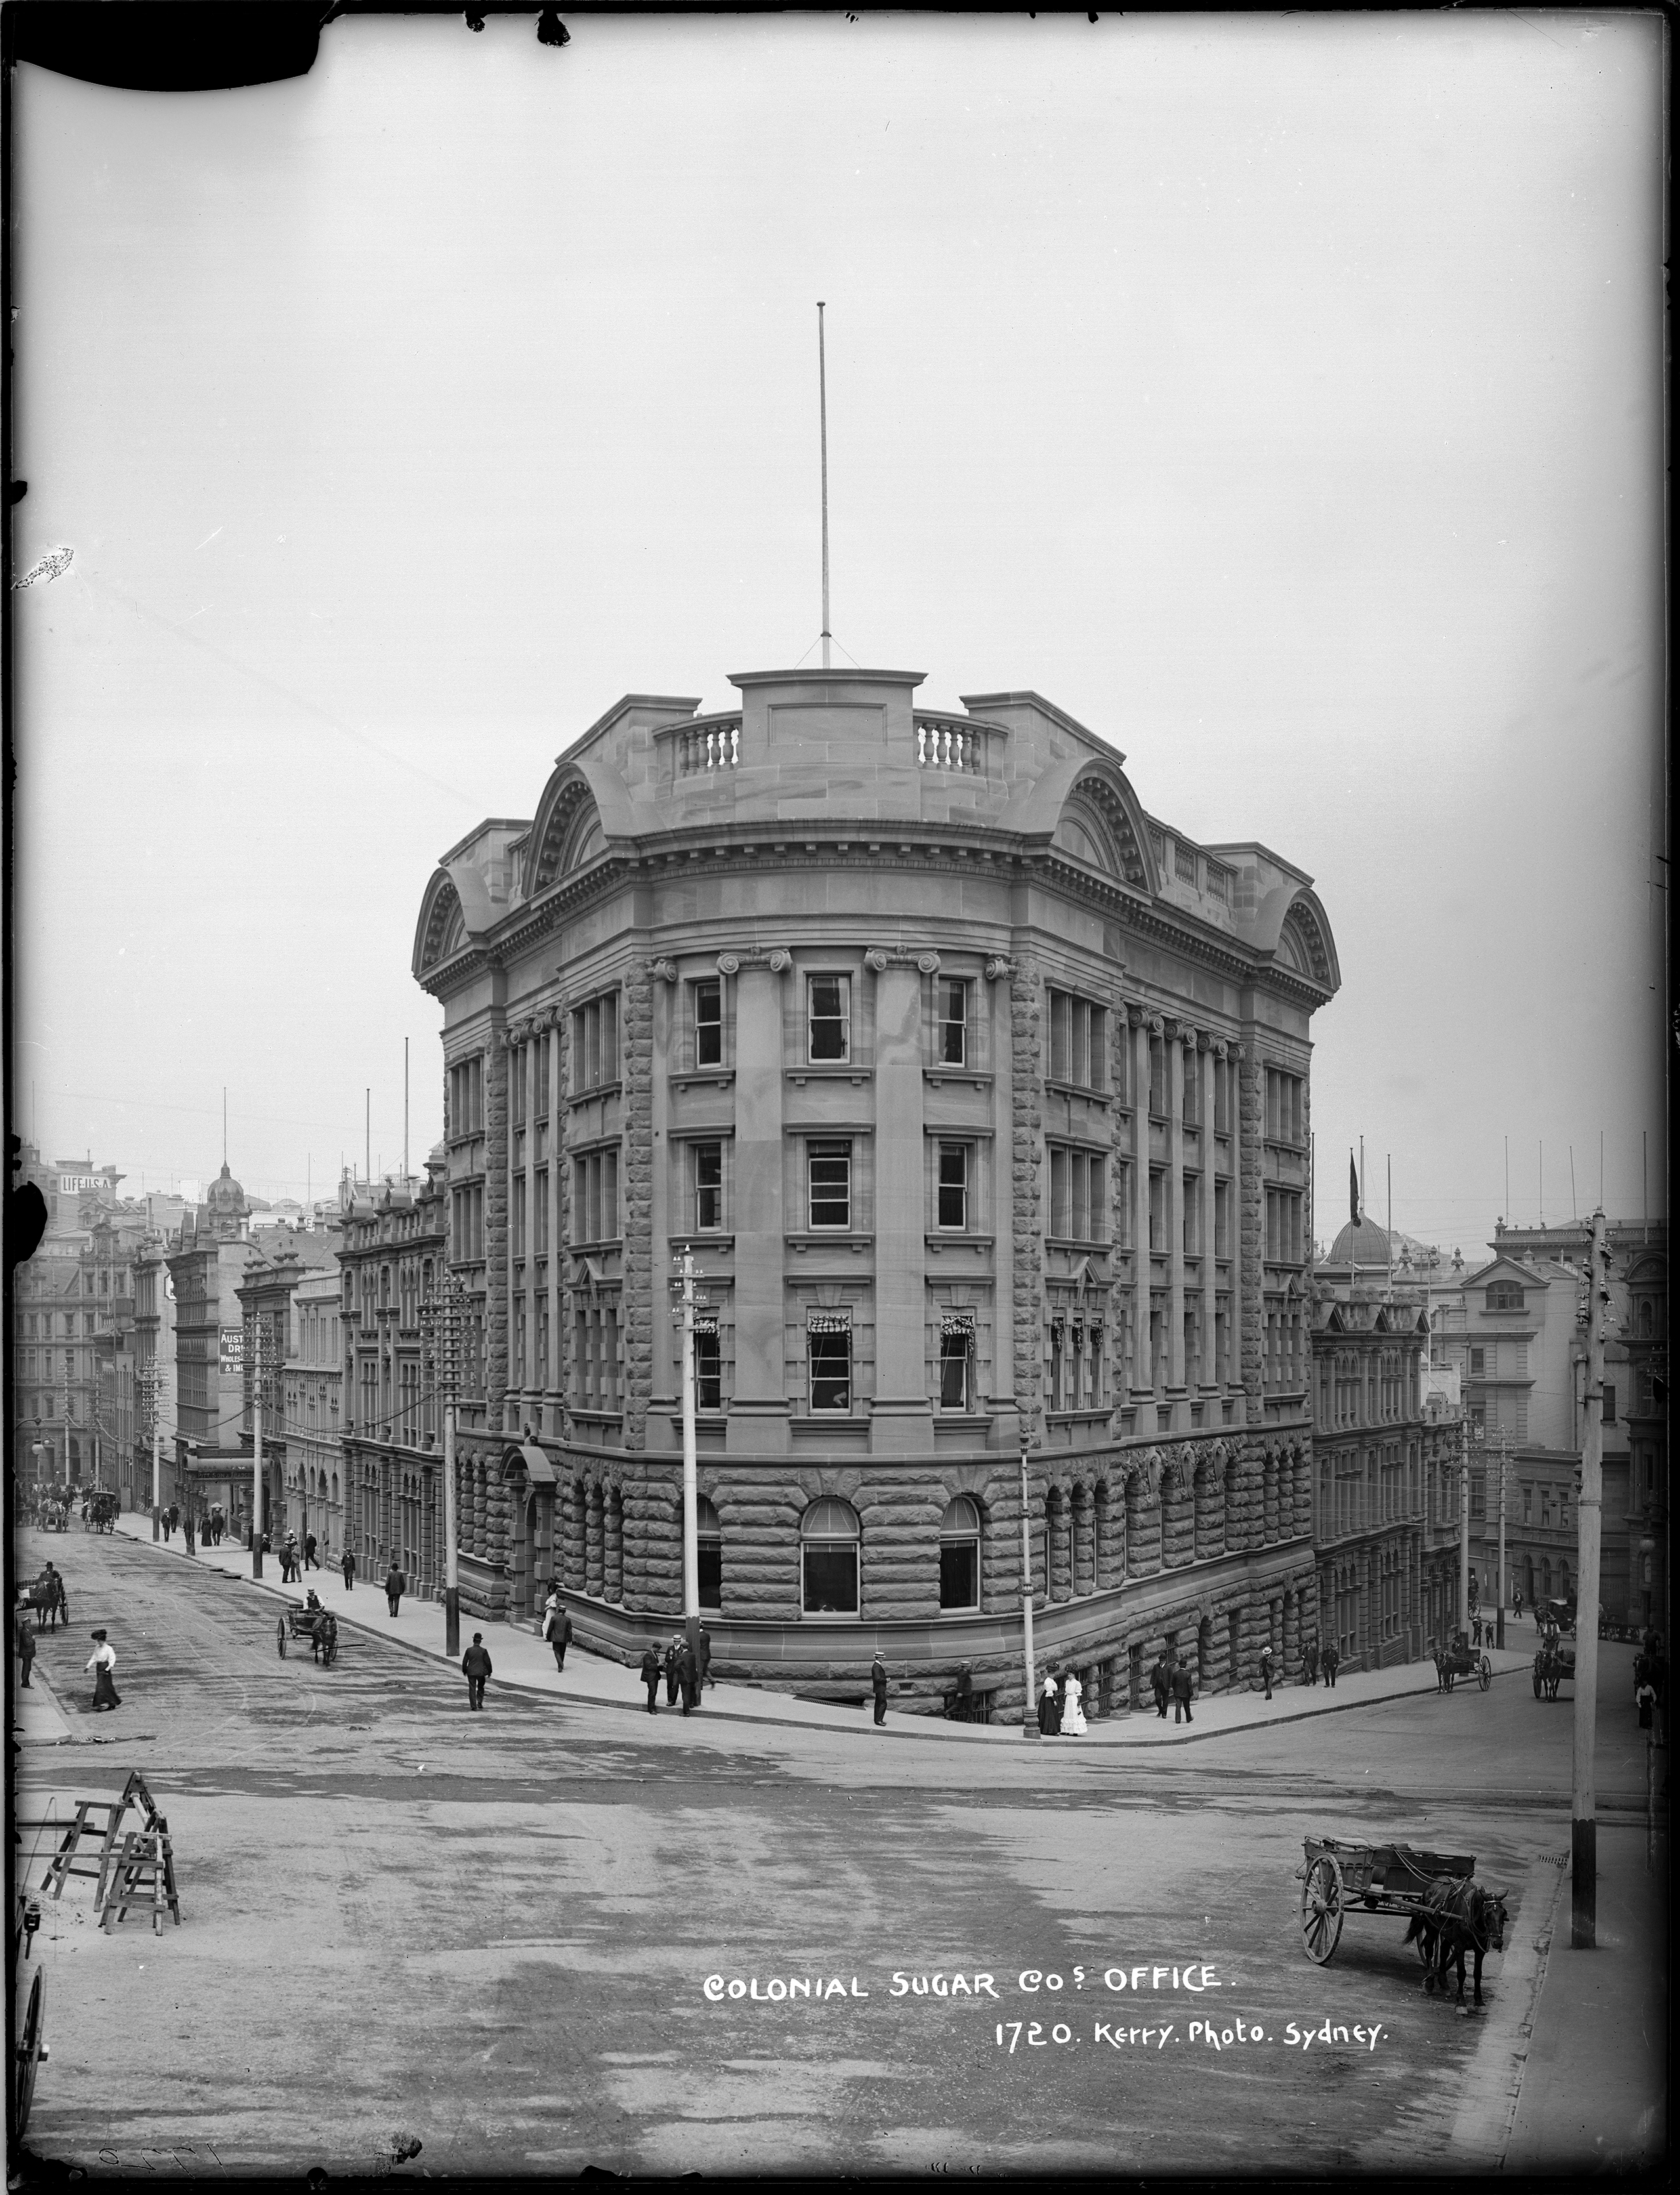 'Colonial Sugar Co Offices' by Kerry and Co from the Tyrrell Collection